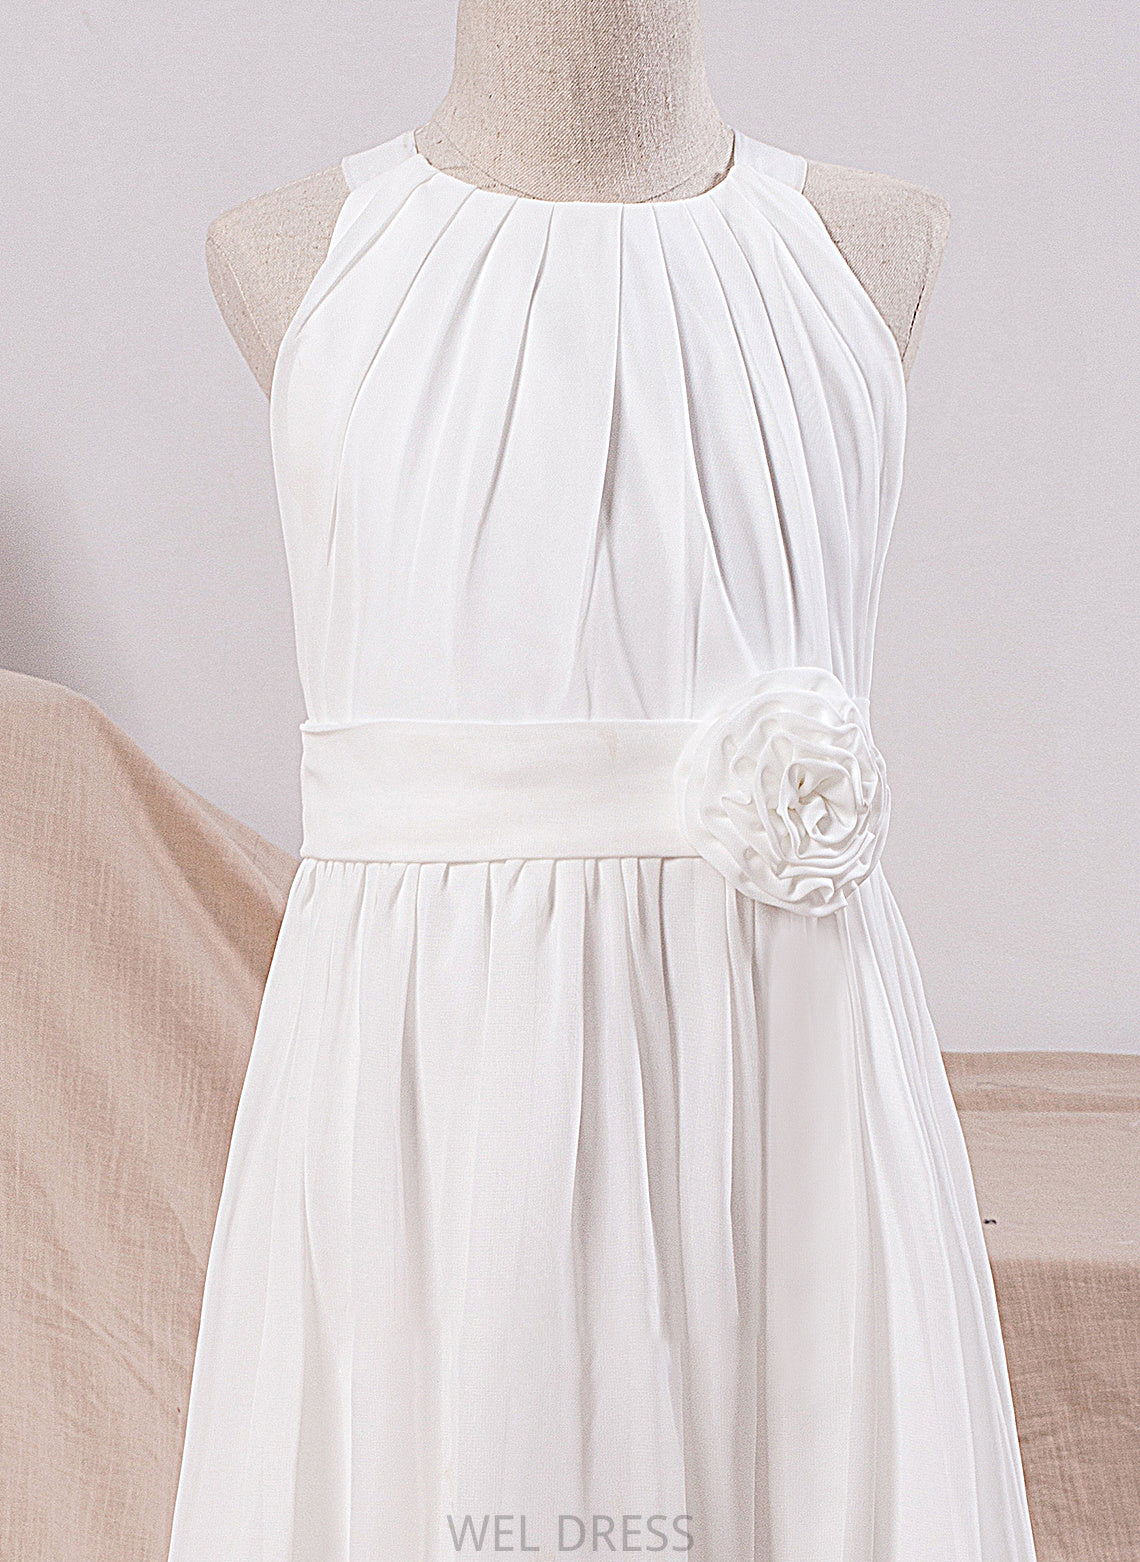 With Junior Bridesmaid Dresses Flower(s) Ankle-Length Chiffon Scoop Neck Tabitha A-Line